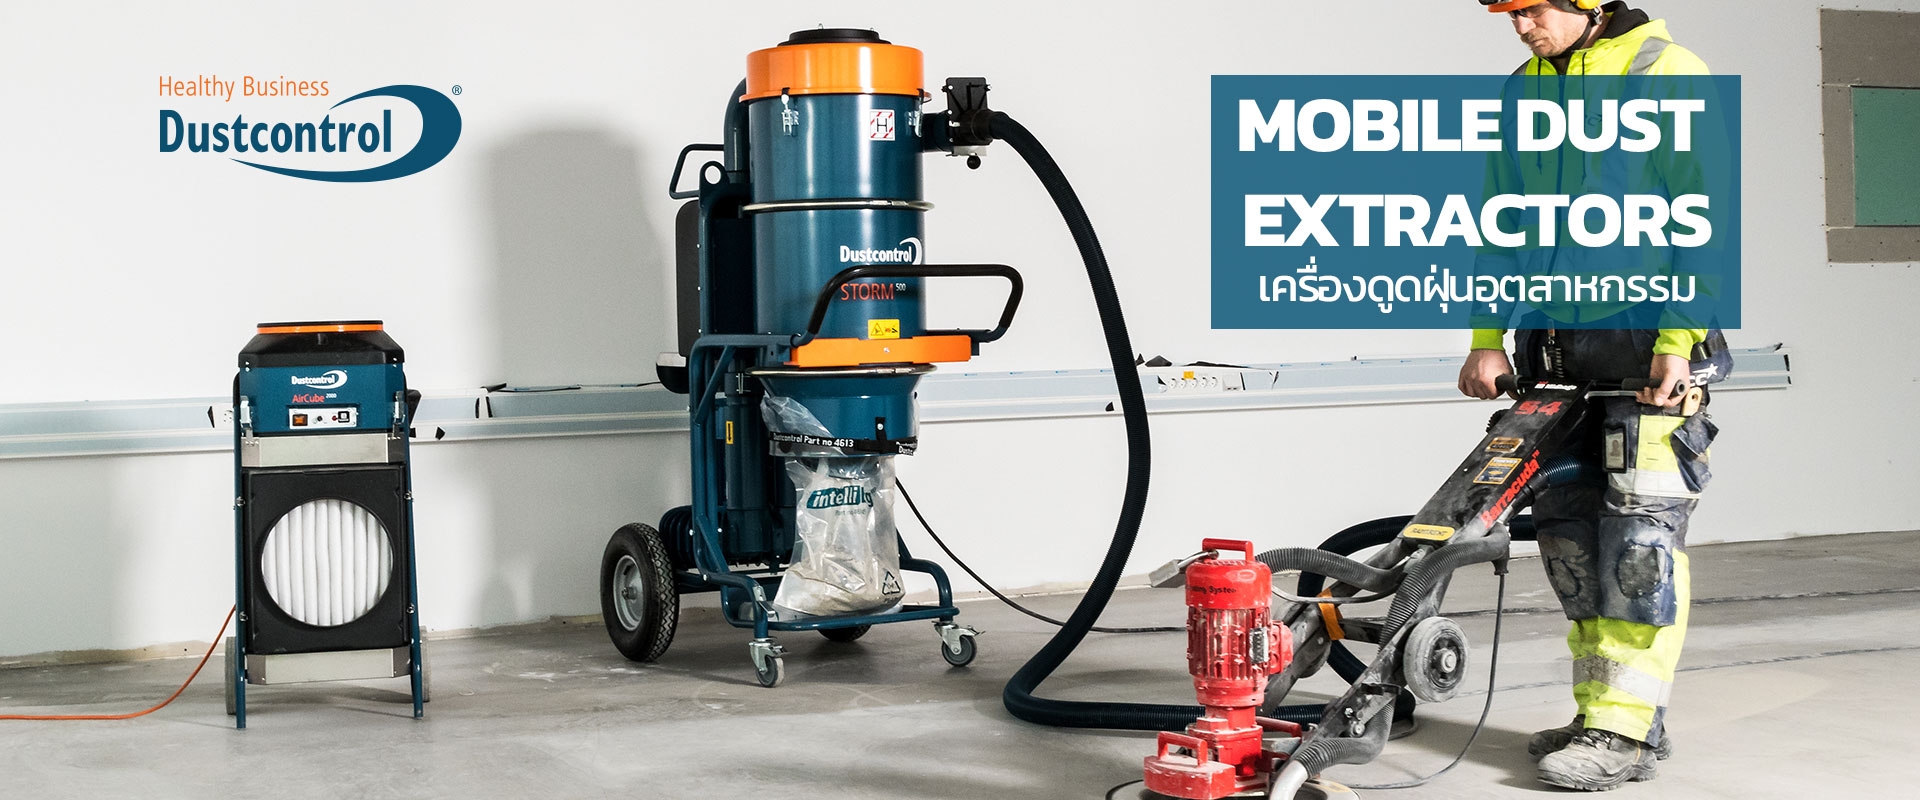 Stationary Vacuum System - Mobile Dust Extractors